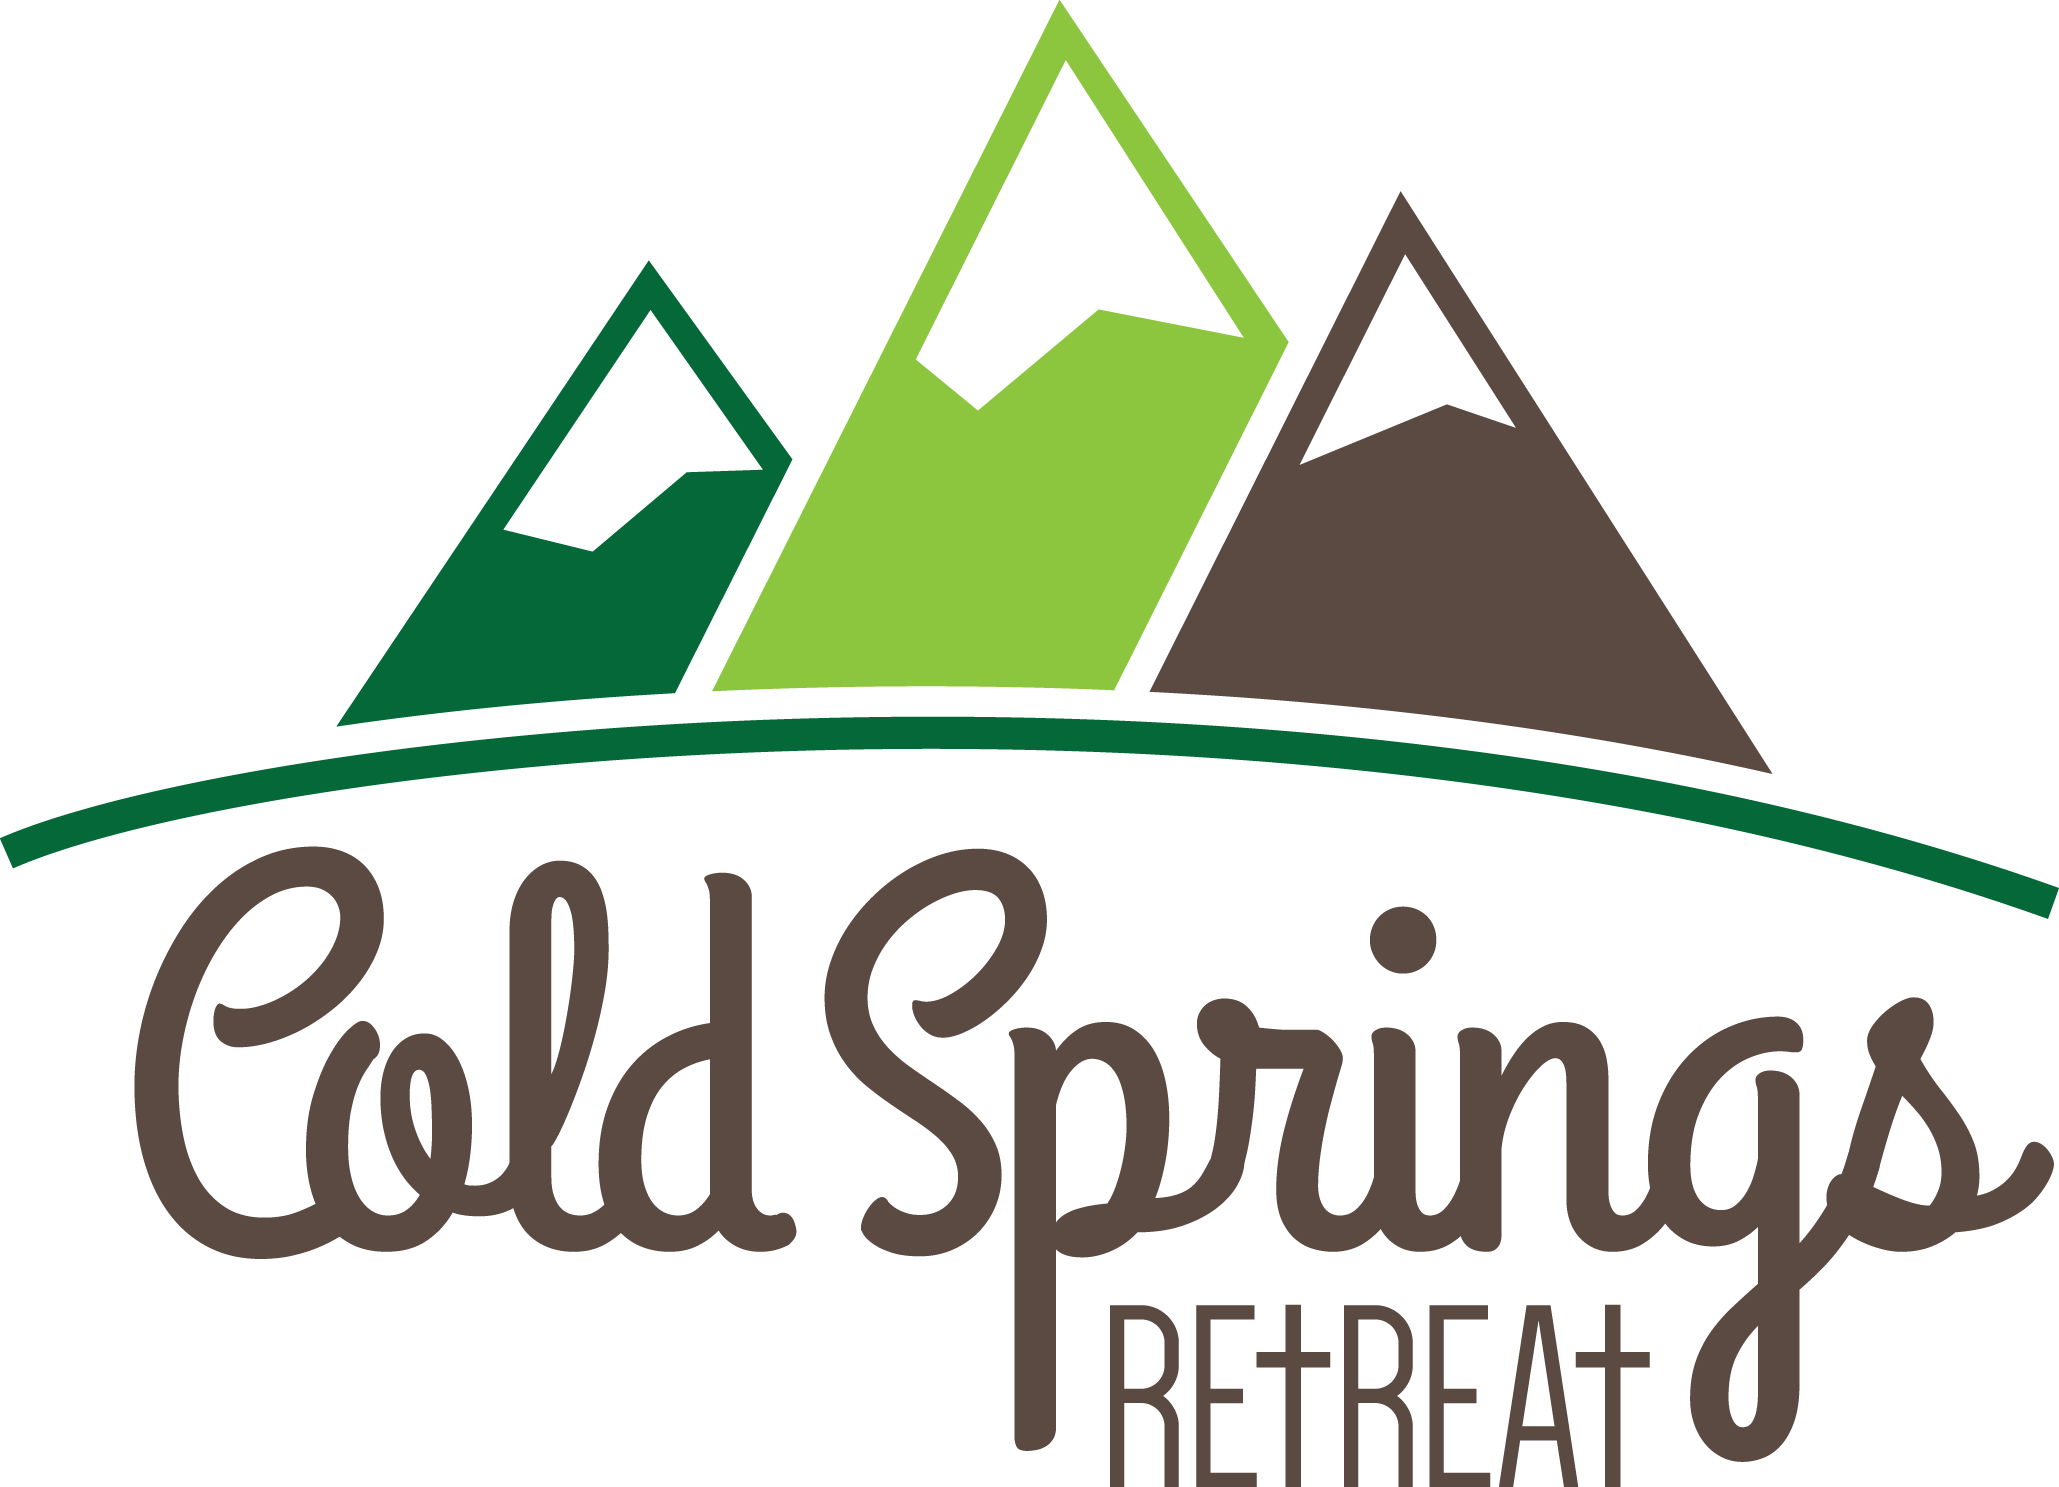 Cold Springs Retreat